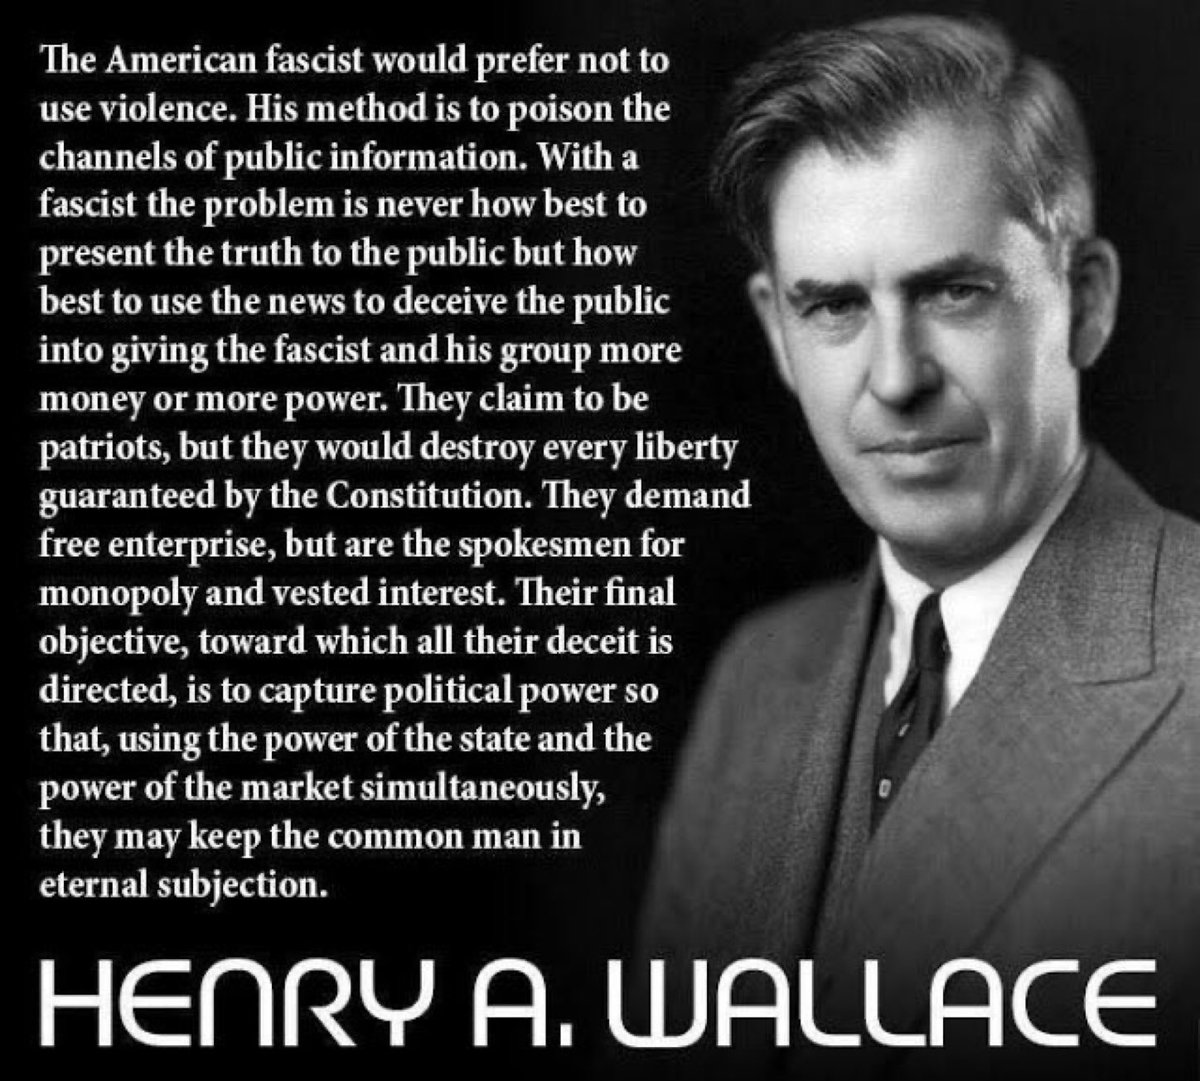 Wholly absent from Snyder’s analysis: The US descent into fascism (corporatism) began 40+ years ago with the embrace of neoliberal economics. Going back even further in our history, FDR’s Vice President Henry A. Wallace issued a prescient warning 6/